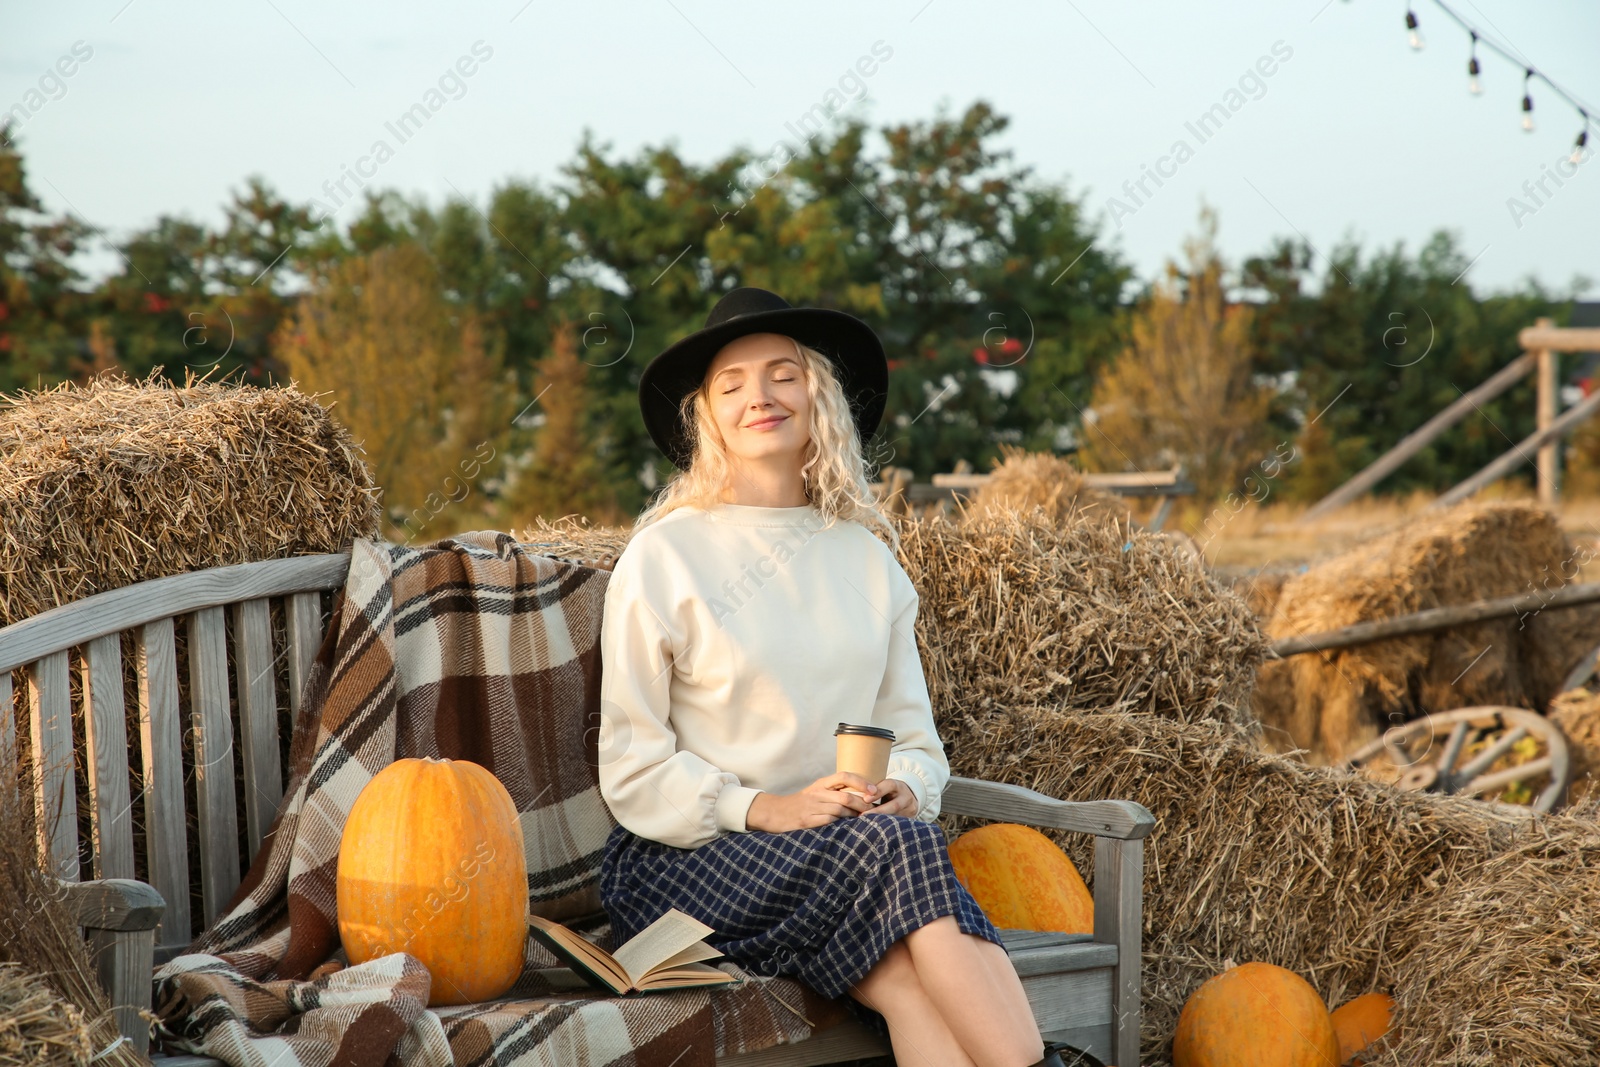 Photo of Beautiful woman with cup of hot drink sitting on wooden bench near hay bales and pumpkins outdoors. Autumn season